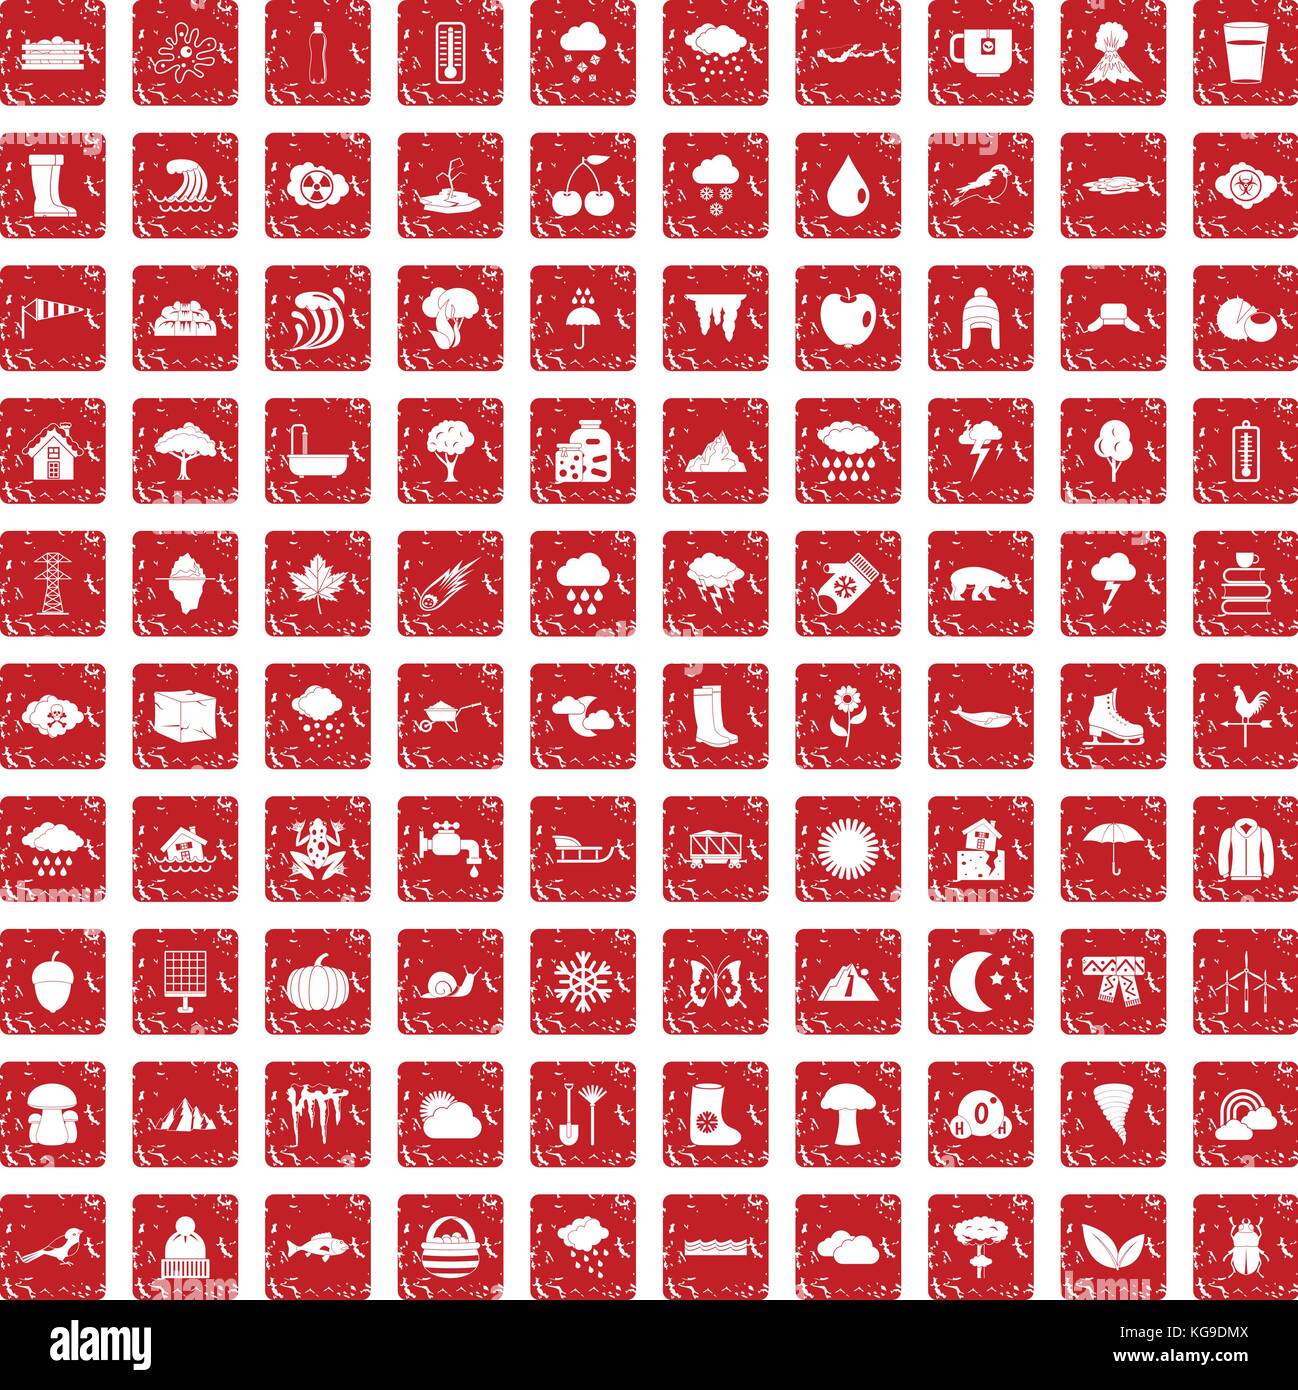 100 clouds icons set grunge red Stock Vector